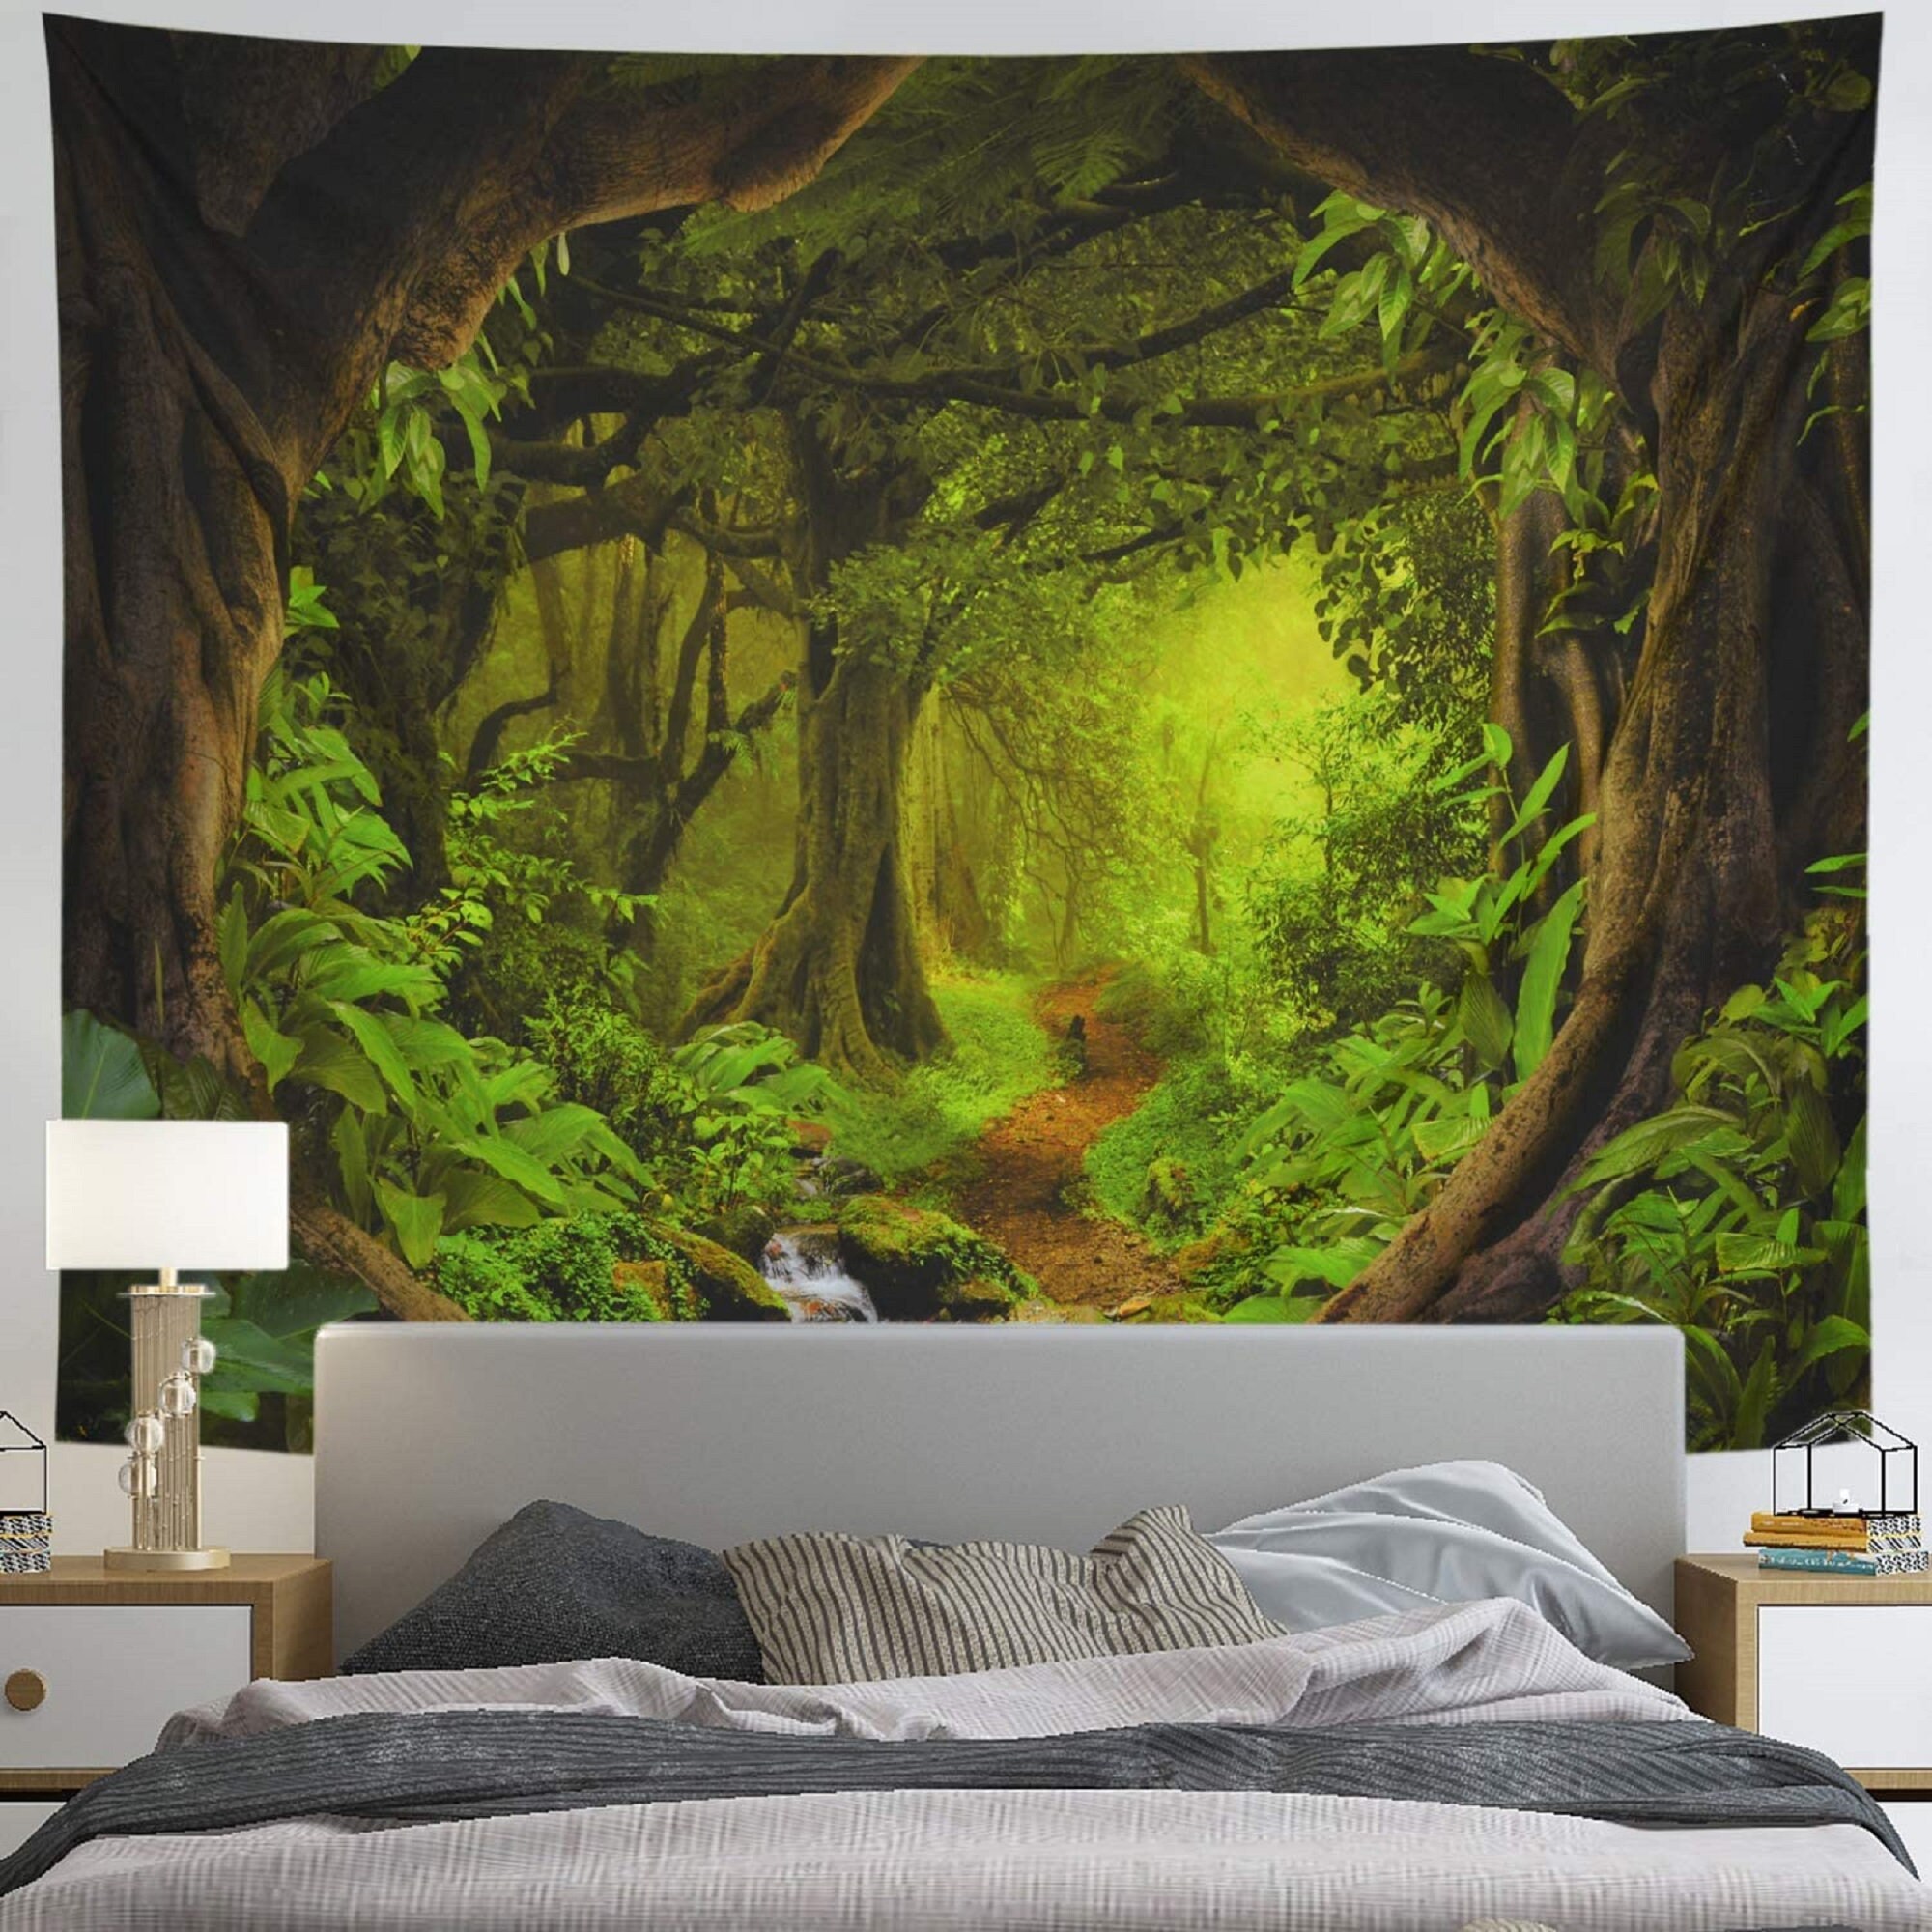 QCWN Fairy Tale Forest Tapestry Fantasy Style Wall Hanging Home Decoration for Bedroom and Living Room 8, 78Wx59L 